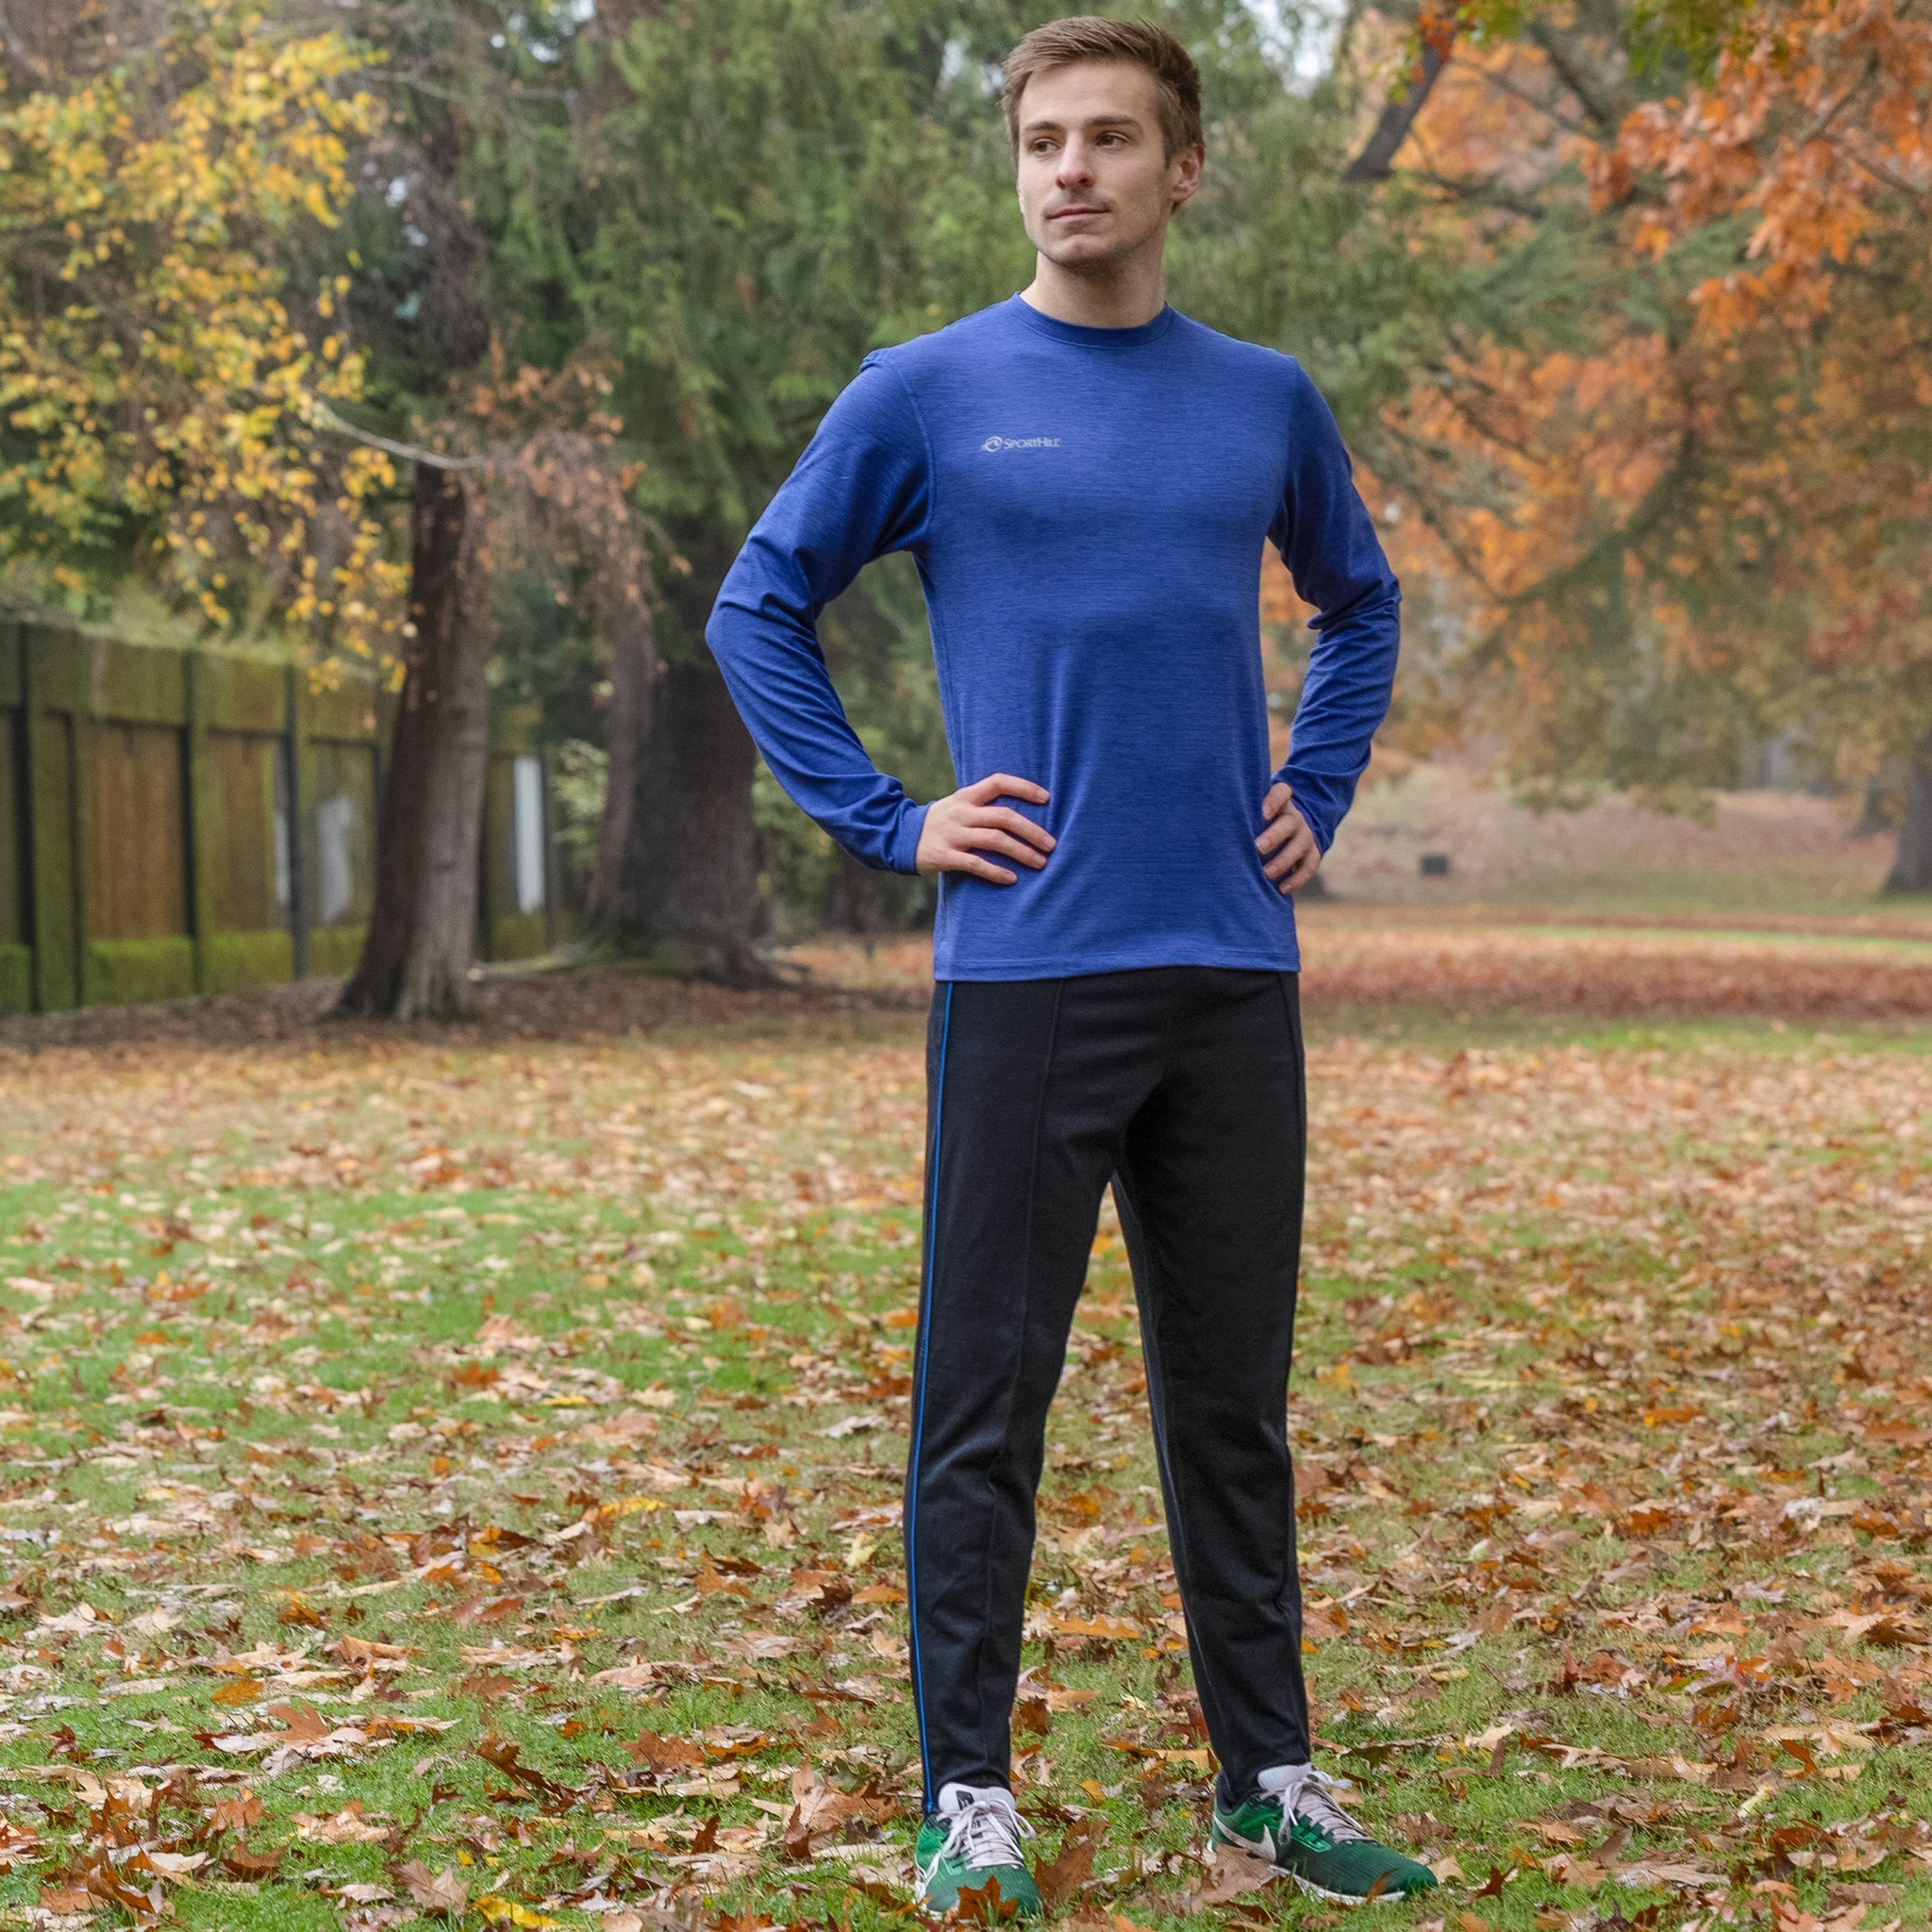 SportHill Original Stirrup Running Pant  Best Selling & Most Comfortable Running  Pants & Tights